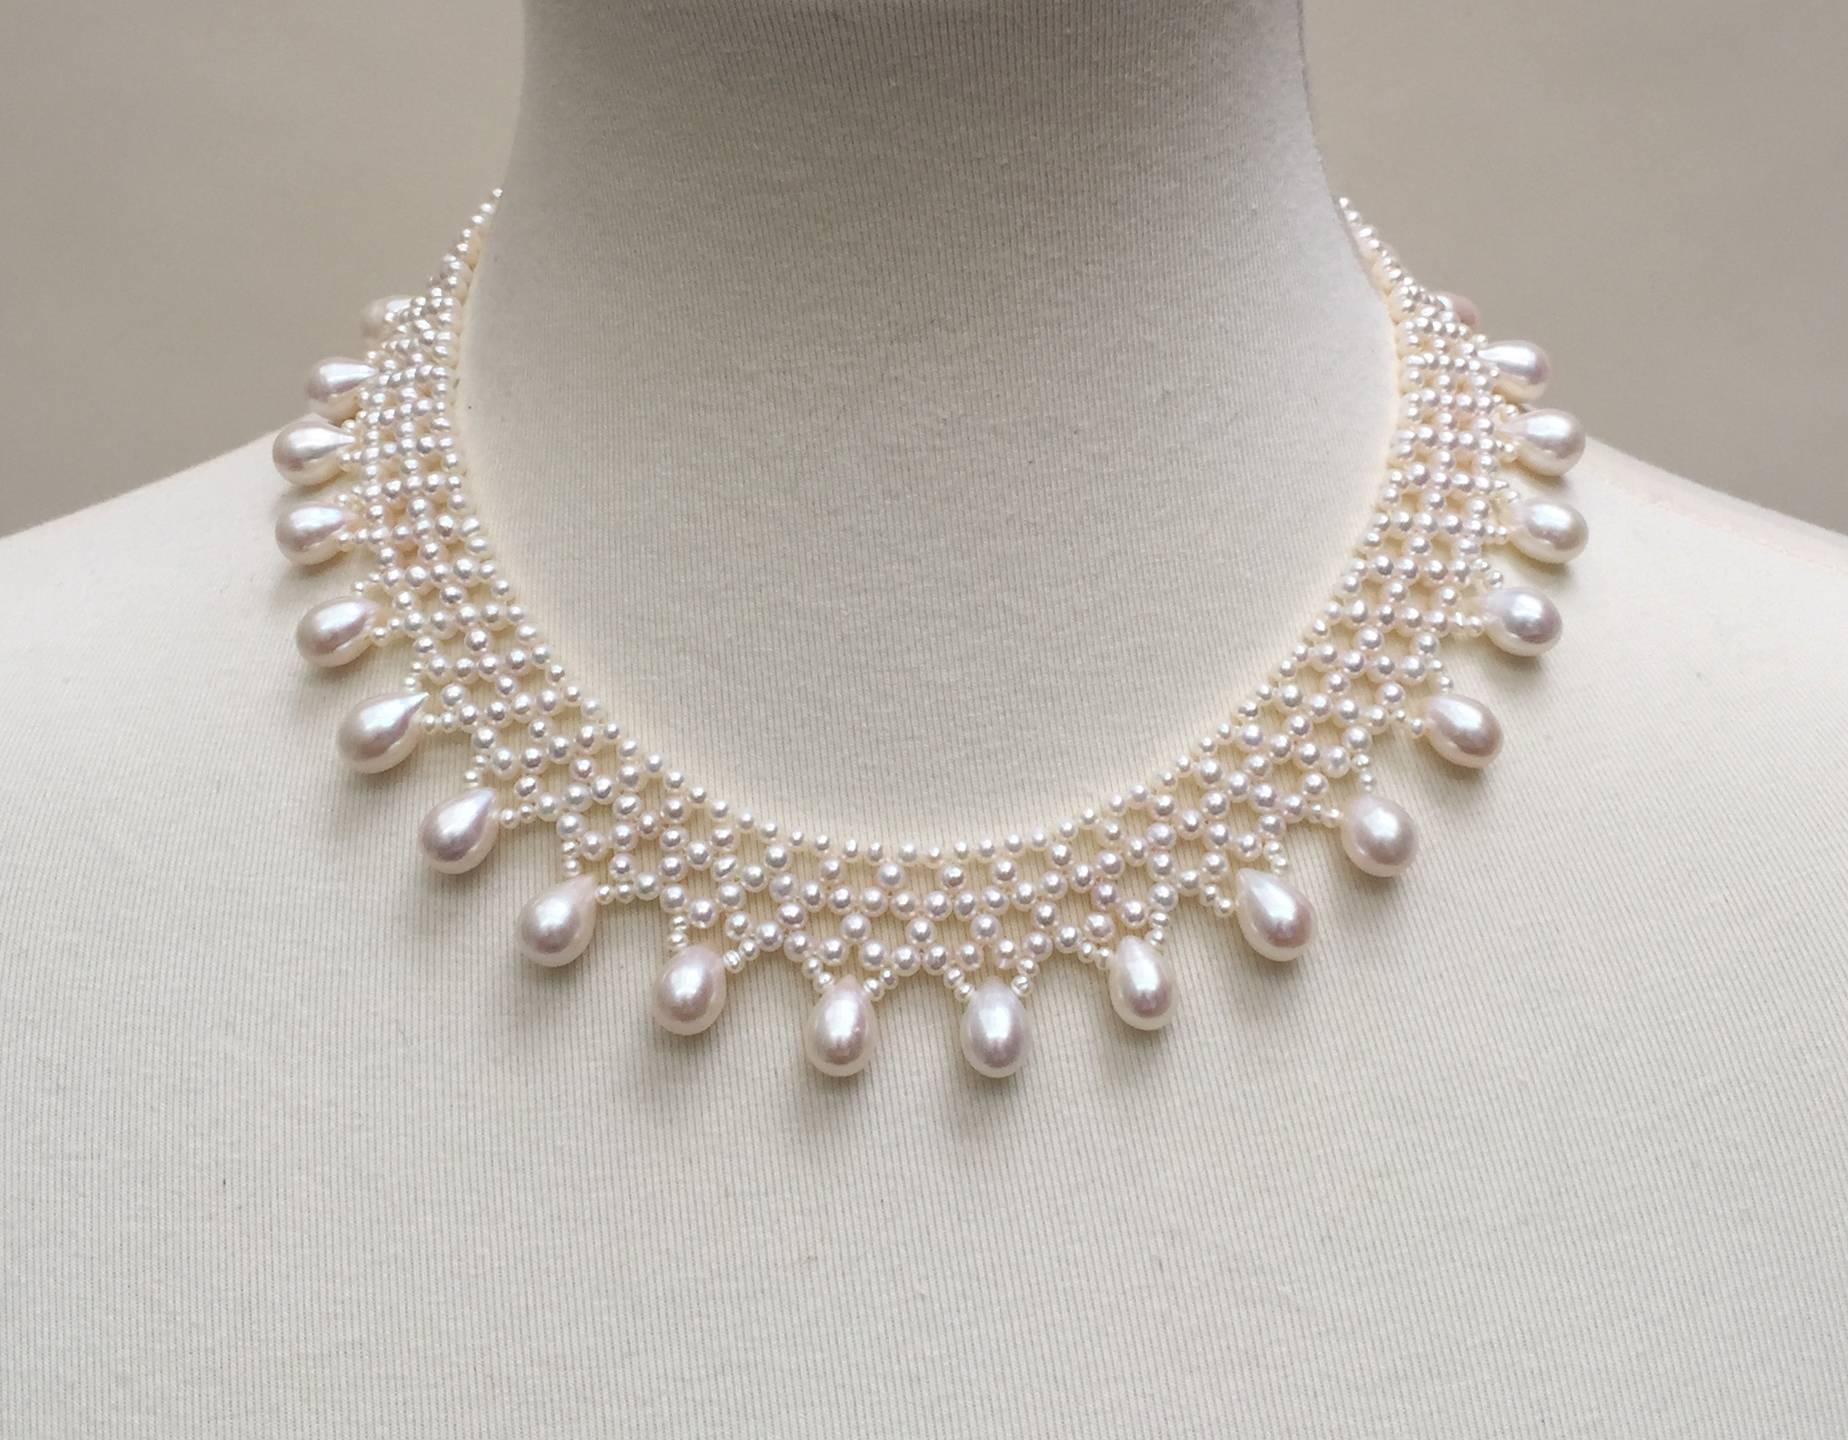 Artist   Marina J  Woven Pearl Necklace with Pear-Shaped Pearl Drops and sliding clasp For Sale